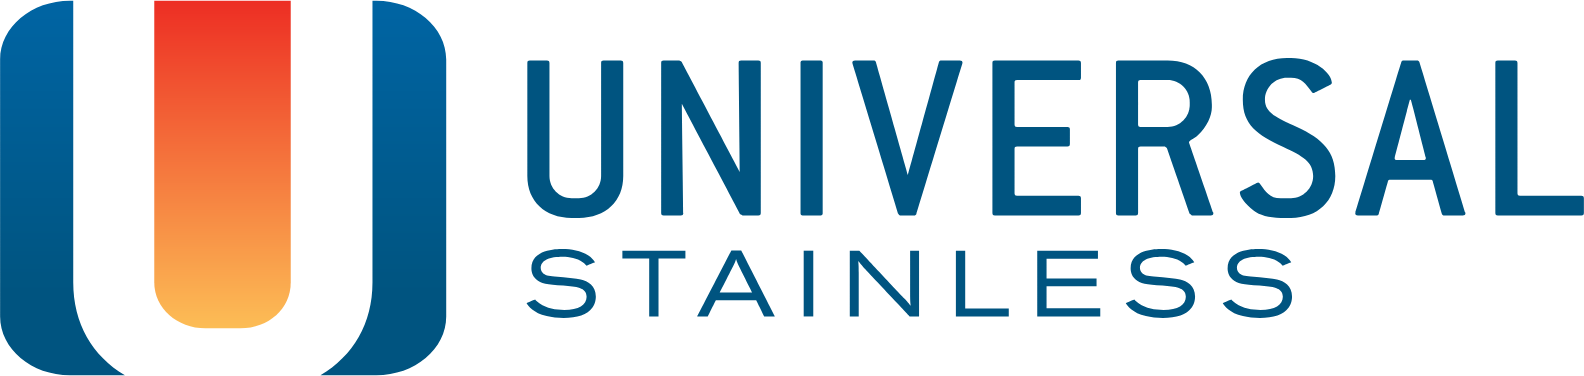 Universal Stainless & Alloy Products logo large (transparent PNG)